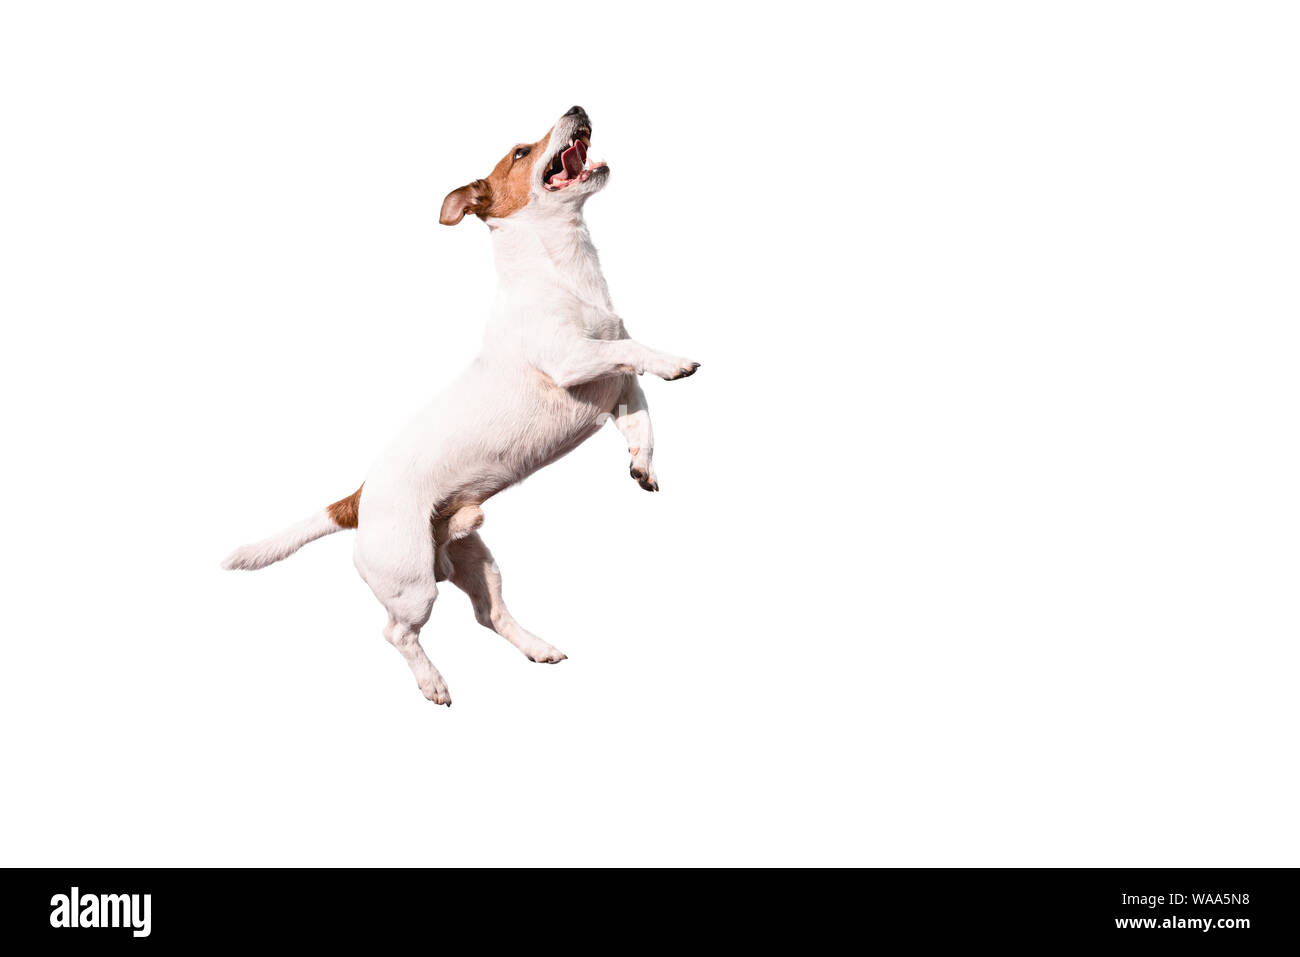 Funny Jack Russell Terrier dog jumping up isolated on white background  Stock Photo - Alamy